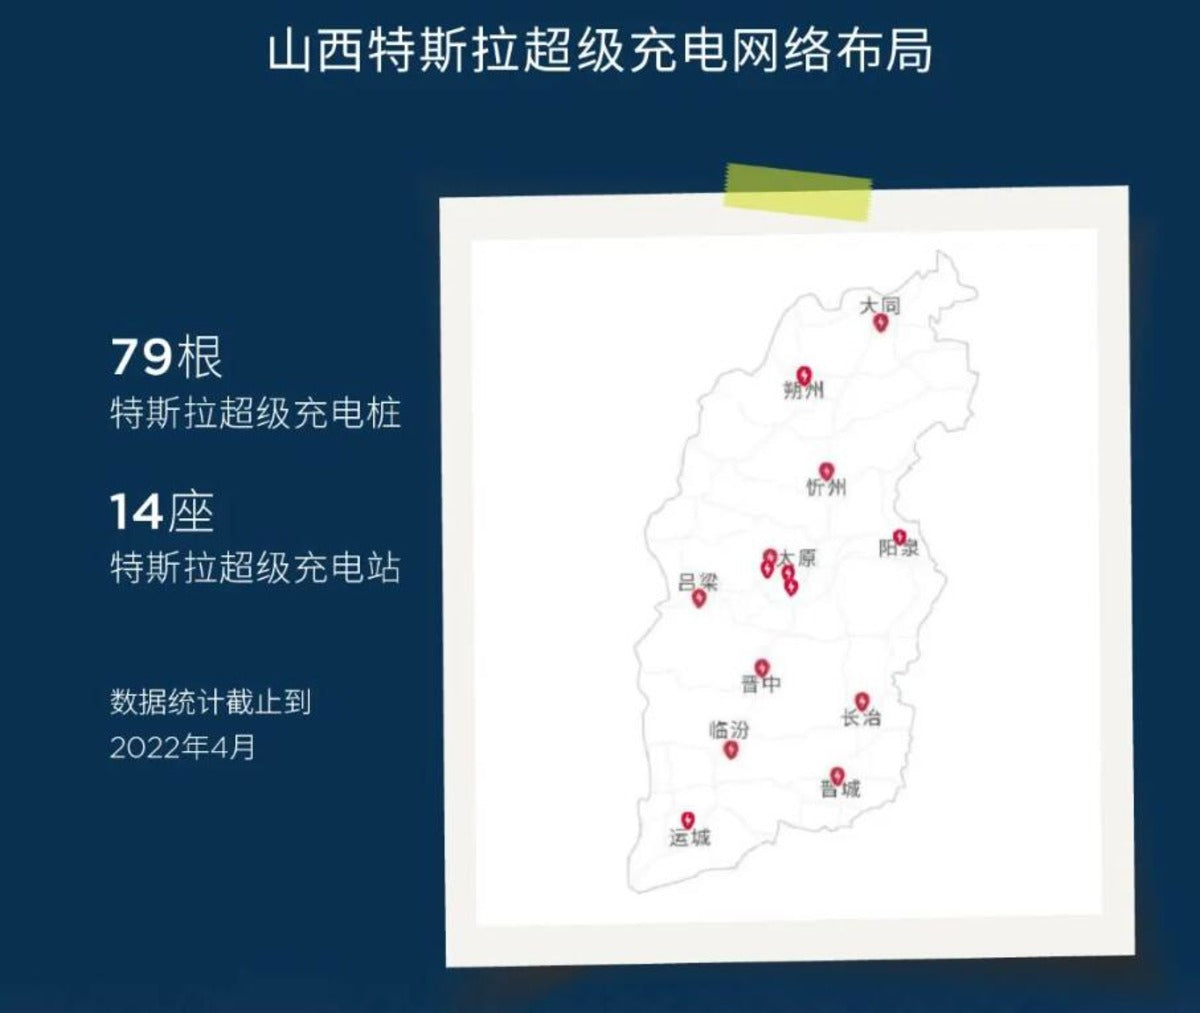 Tesla Supercharger Network Covers All Cities in Shanxi Province in North China